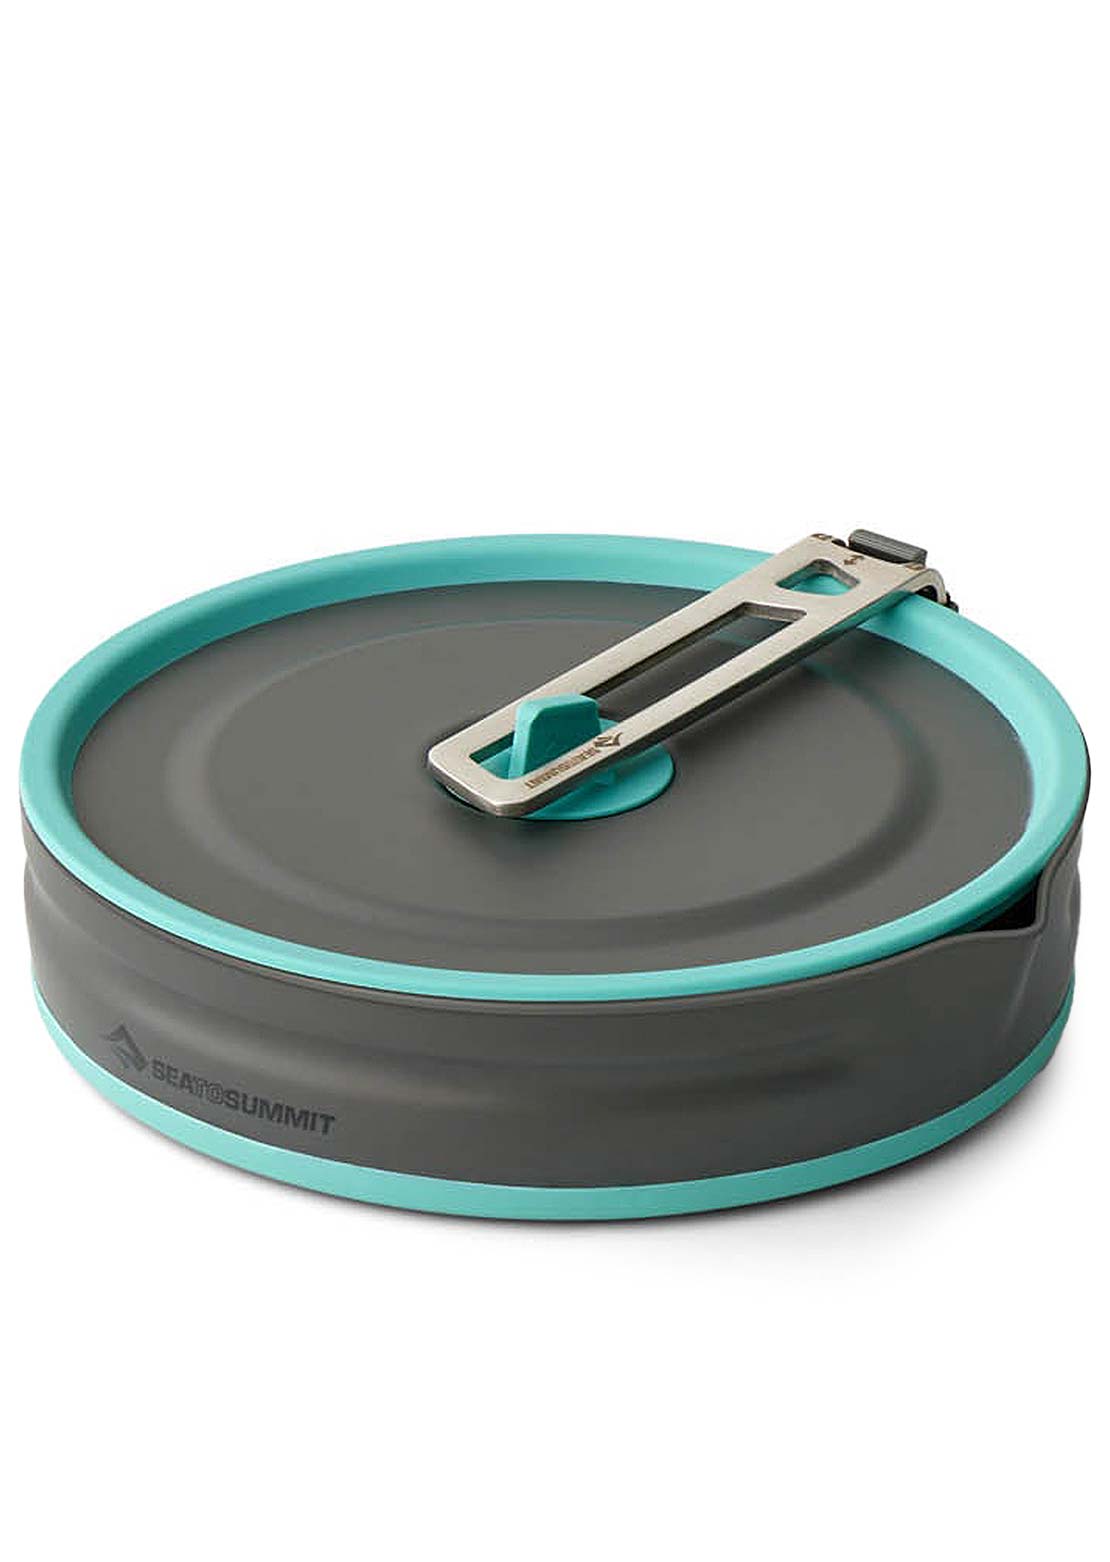 Sea To Summit Frontier UL Collapsible Pouring Pot